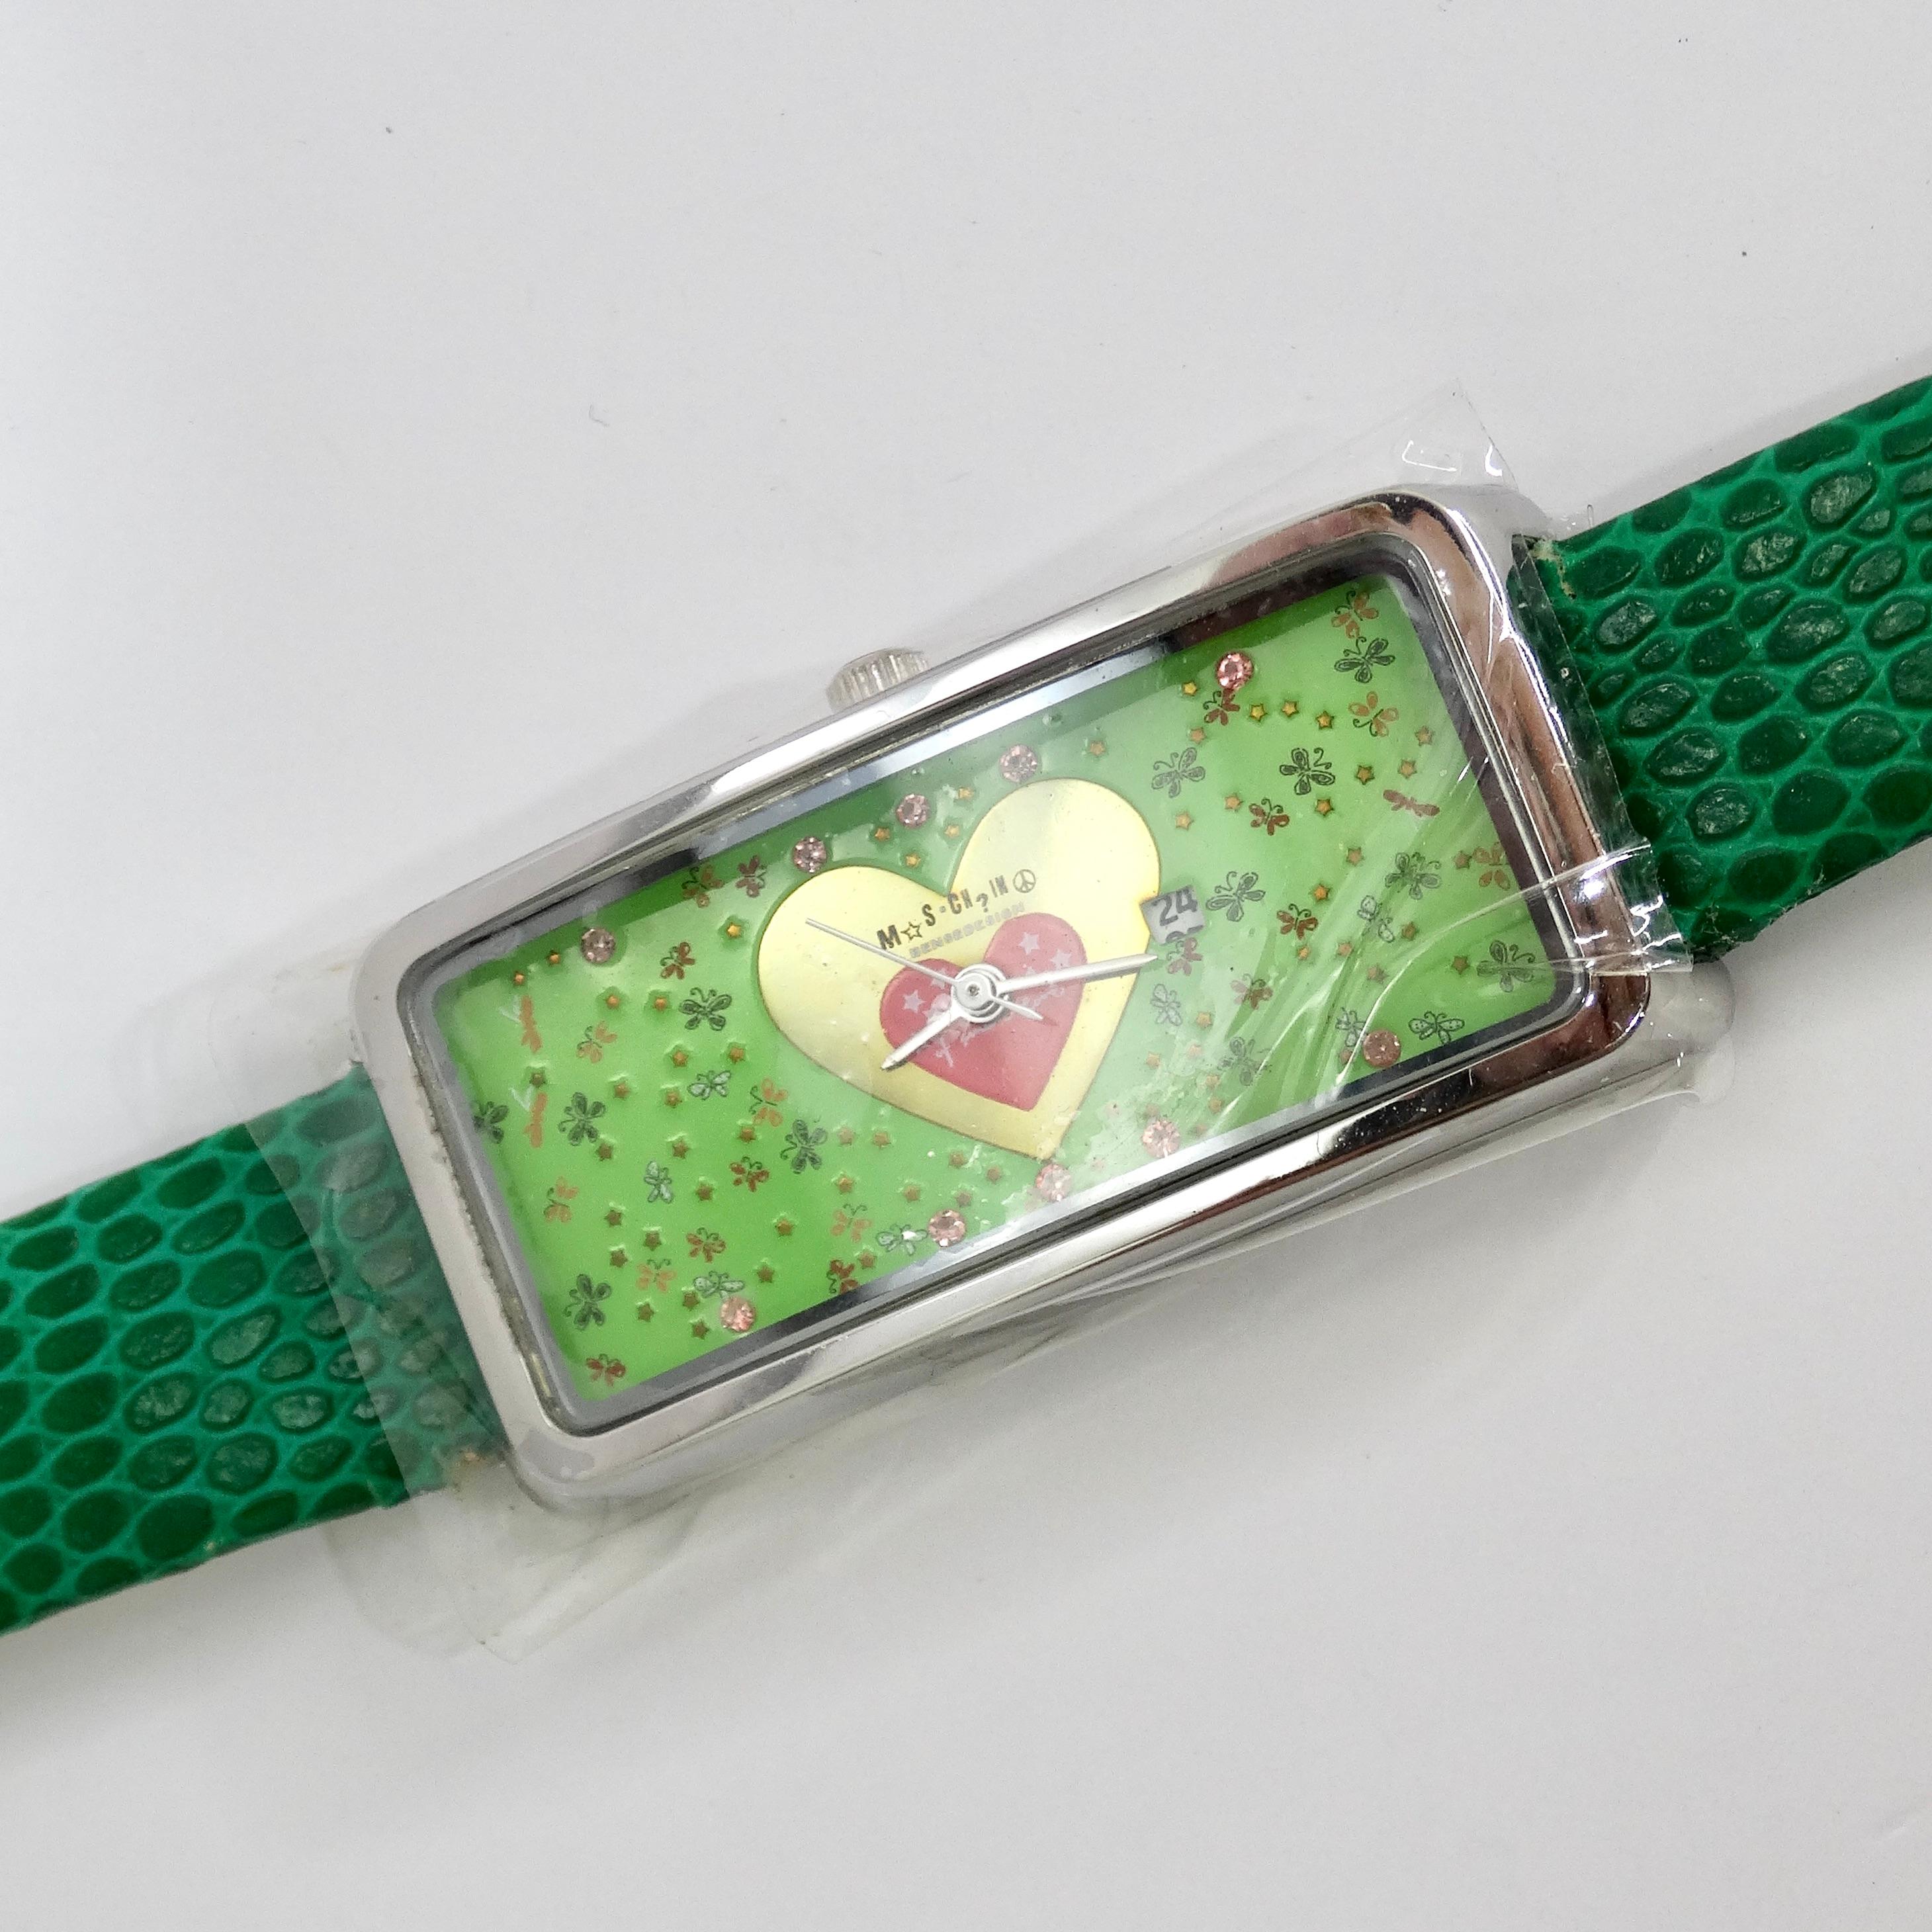 Introducing the delightful Moschino 1980s Green Lizard Embossed Watch, a charming vintage timepiece that captures the essence of playful elegance and vibrant style. This adorable deadstock Moschino watch features a deep emerald green lizard-embossed